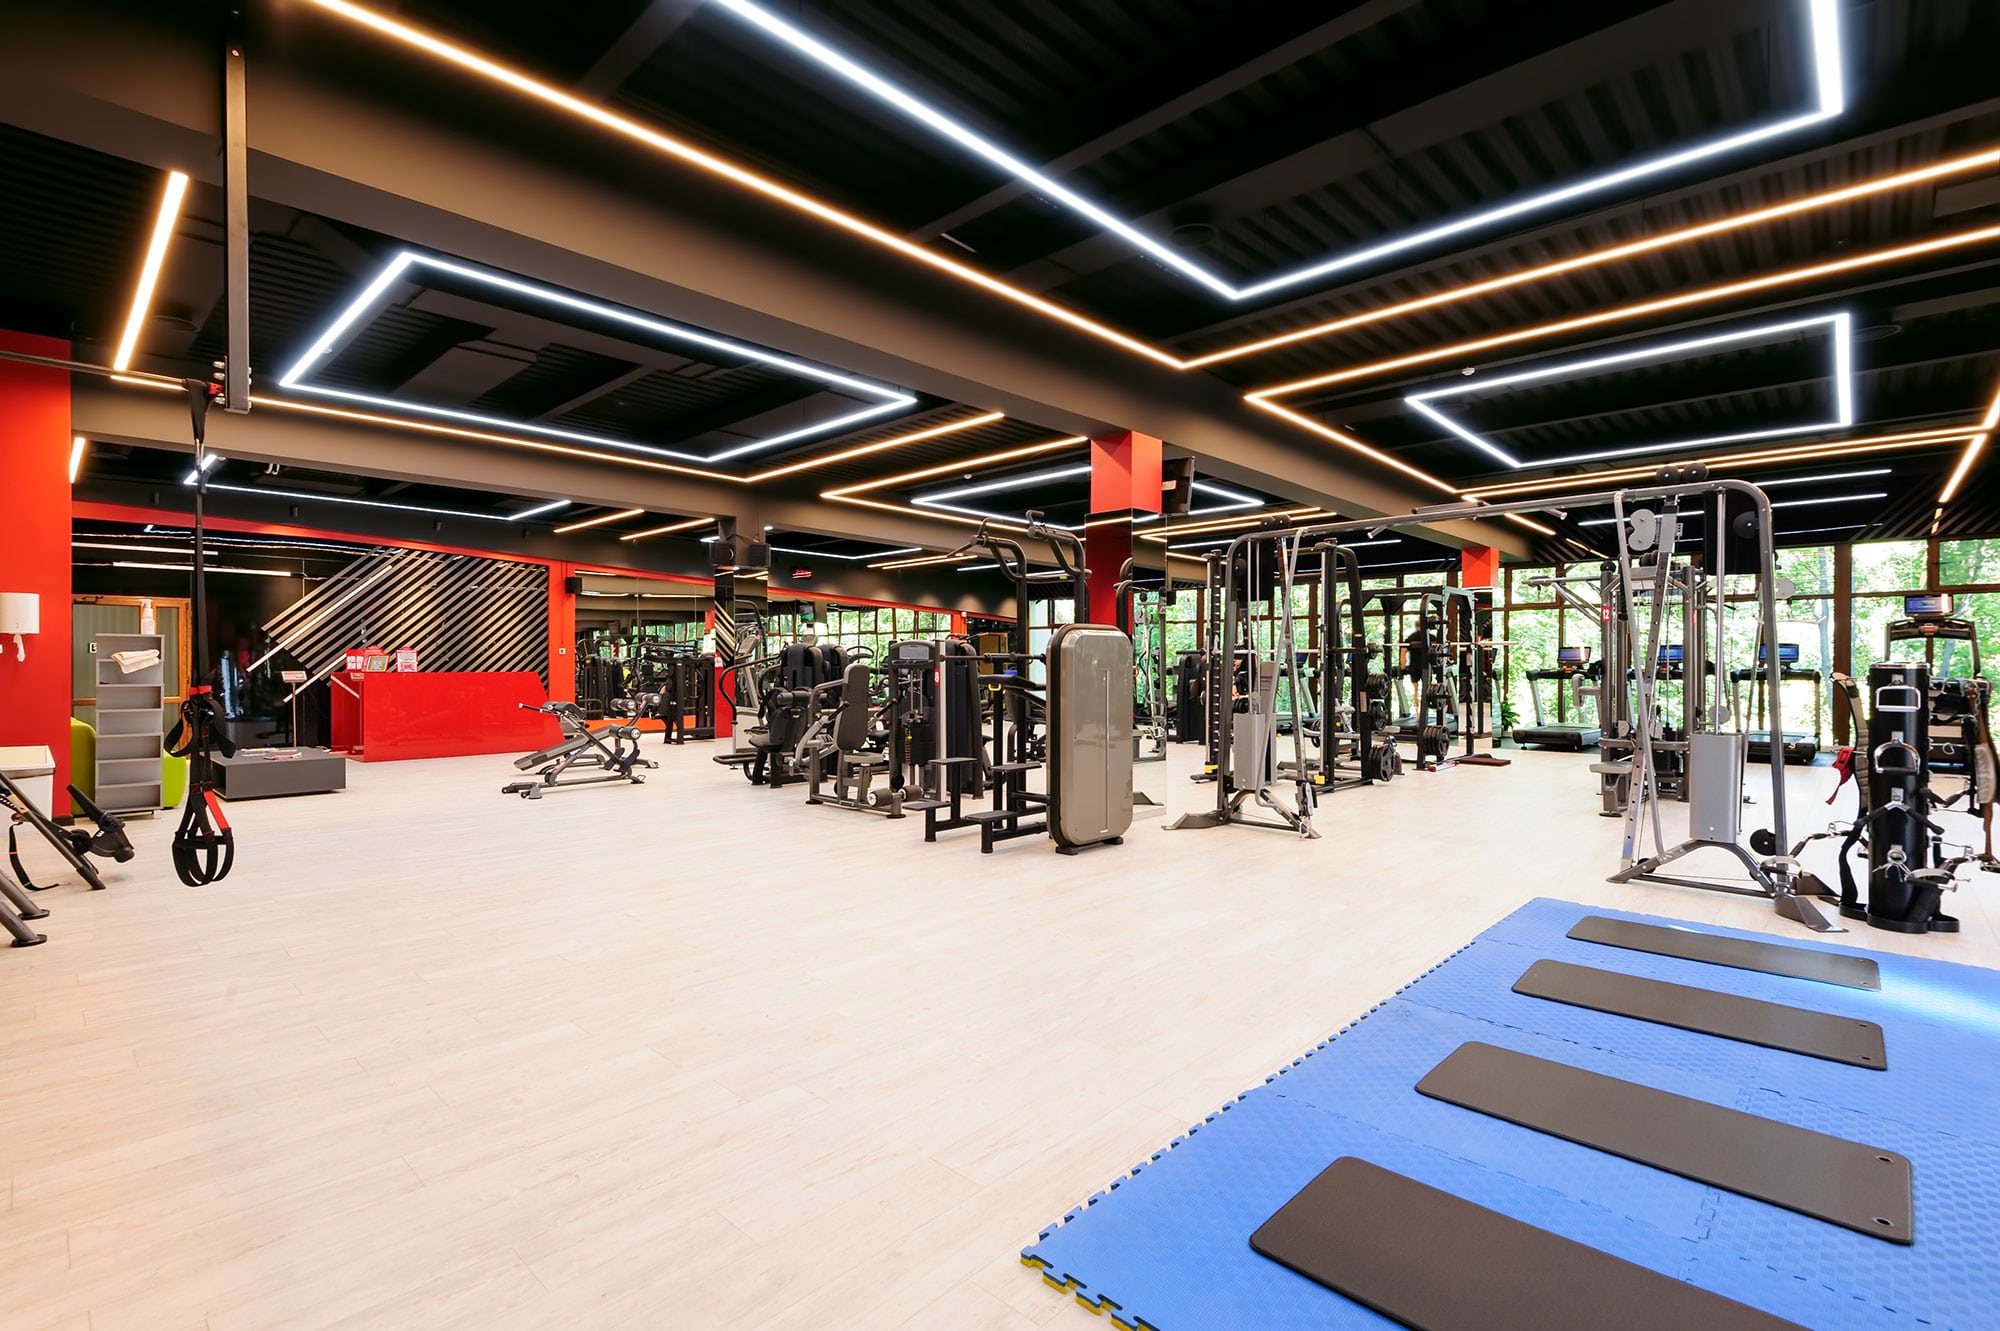 Urgent correction required to legislation governing Tier 3 restrictions for gyms and leisure facilities